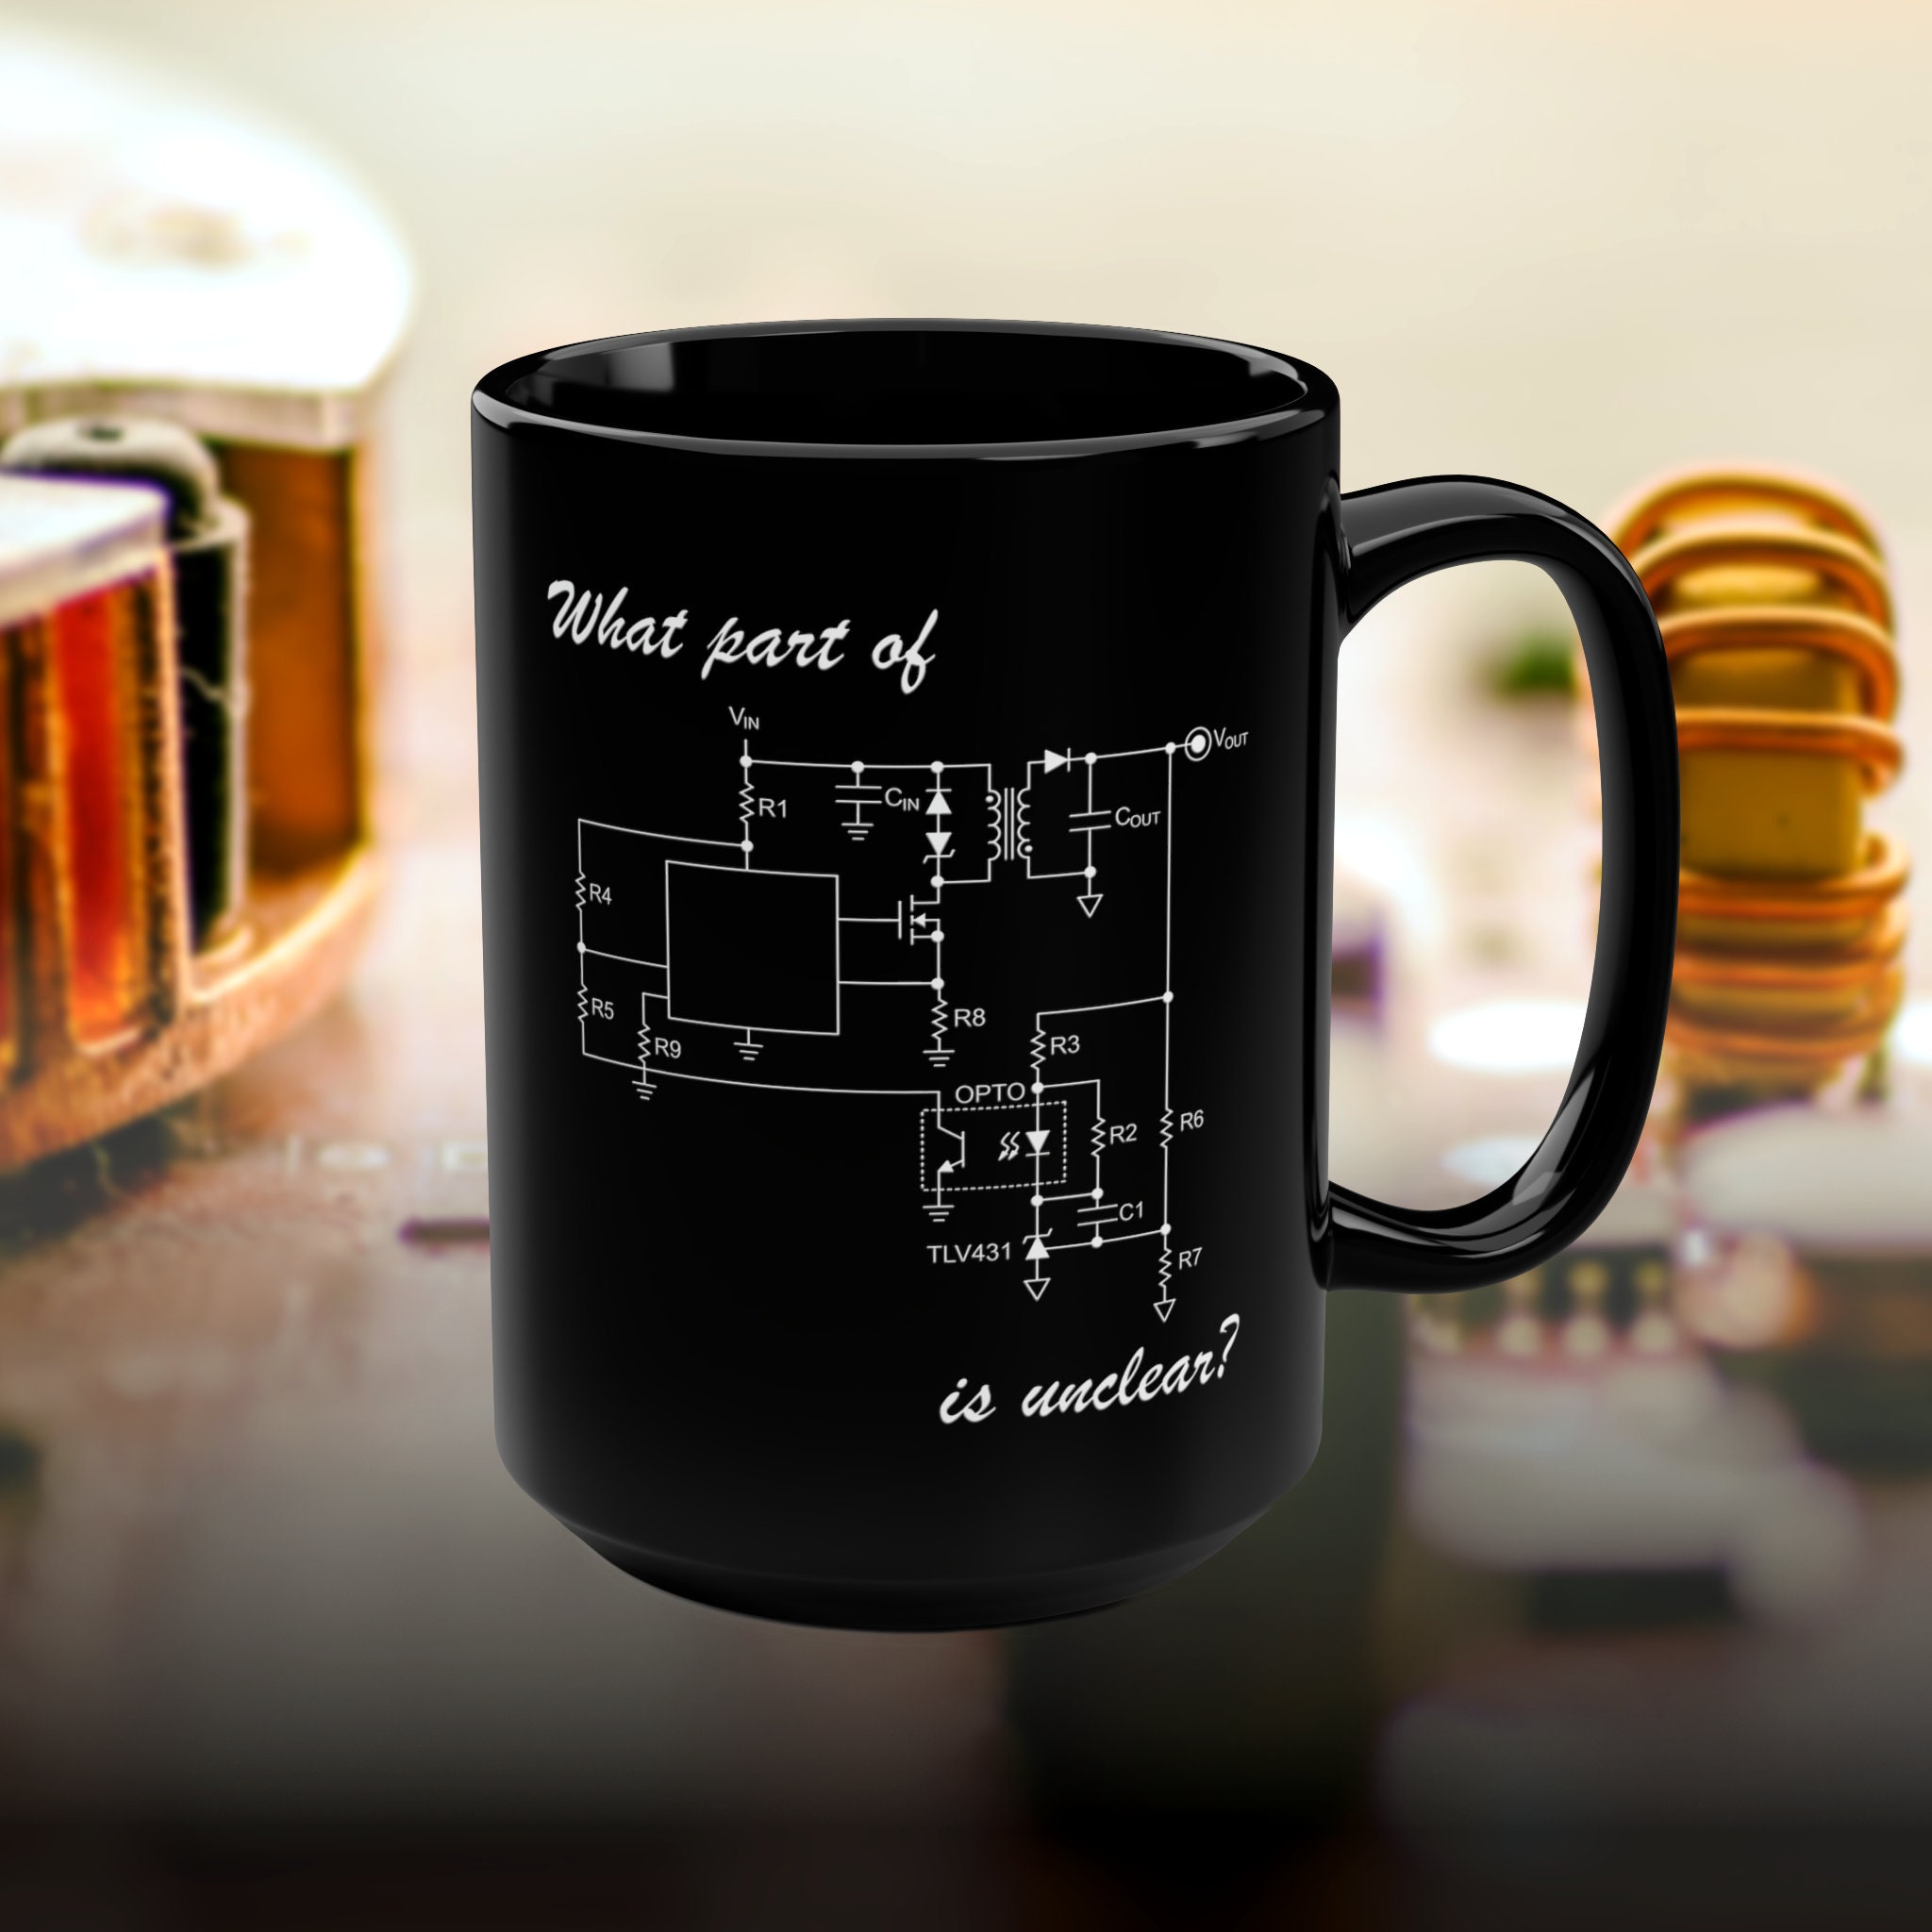 Save A Fuse Blow An Electrician For Electric Engineers Coffee Mug by Tom  Publishing - Fine Art America